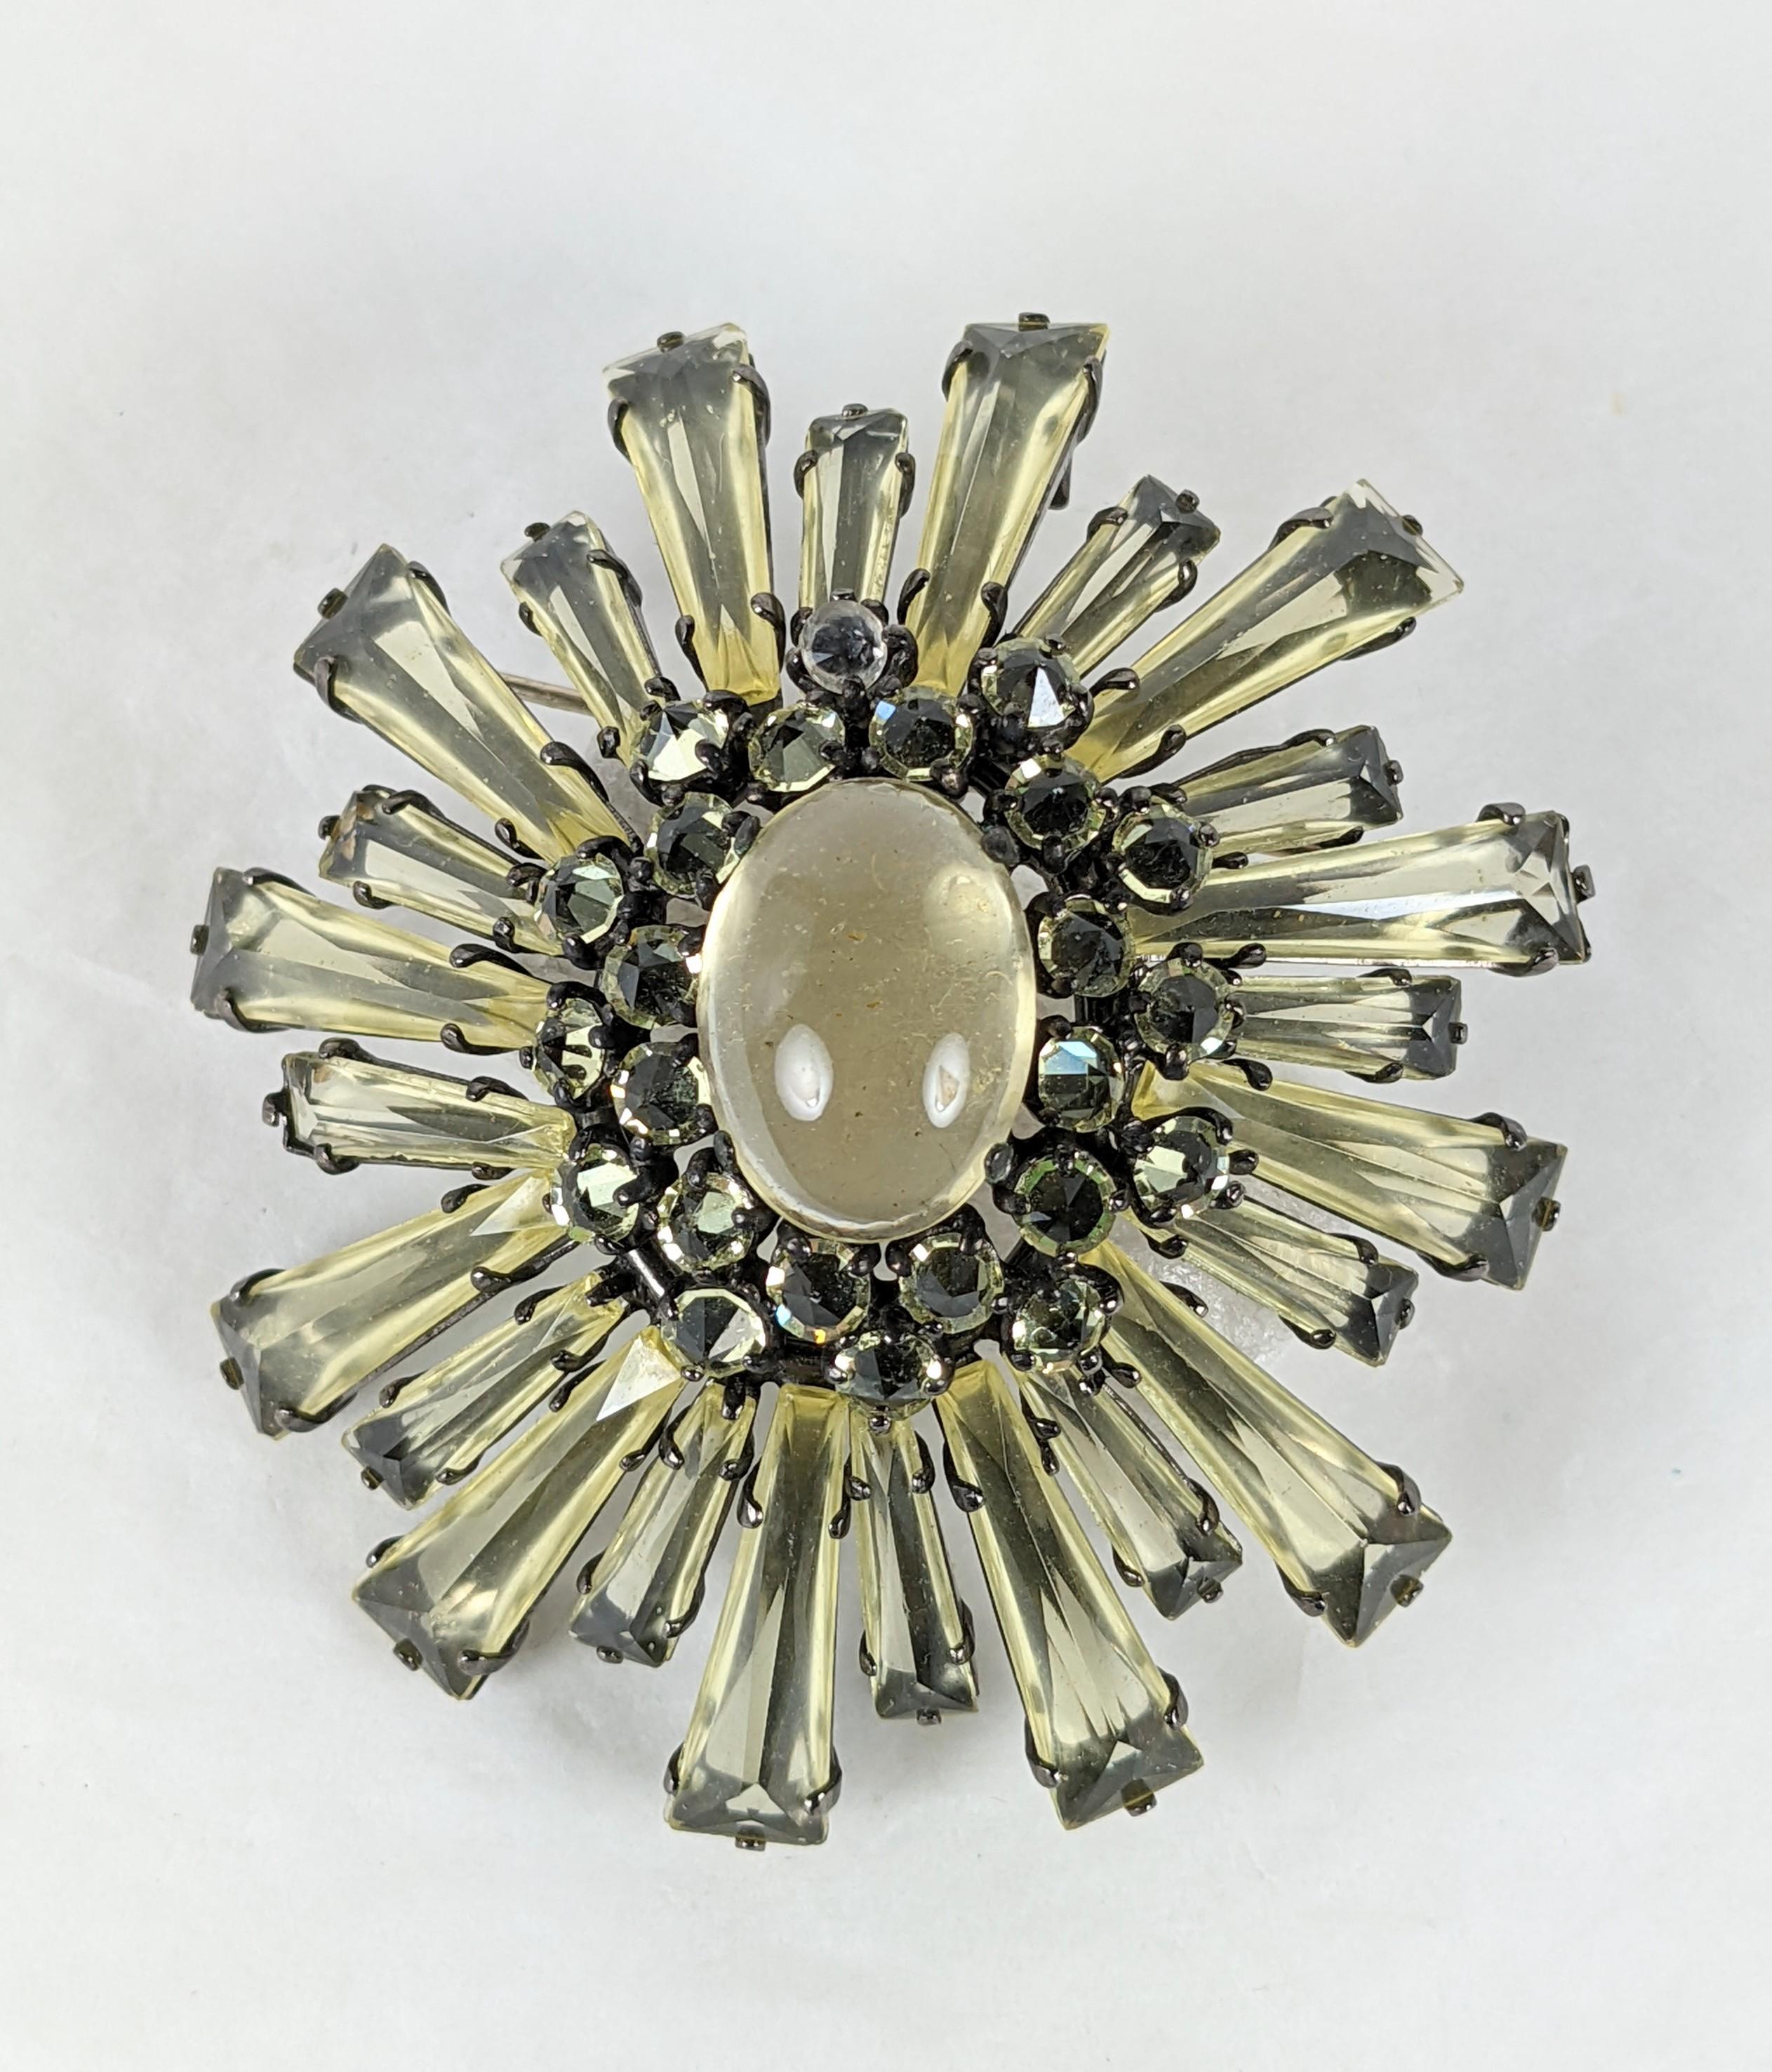 Collectible Schreiner Ruffle Brooch with signature kite shaped stones and a central cabochon all in tones of pale citrine crystal.  Elaborate 2 tier construction with pendant hook. Unsigned.
2.75